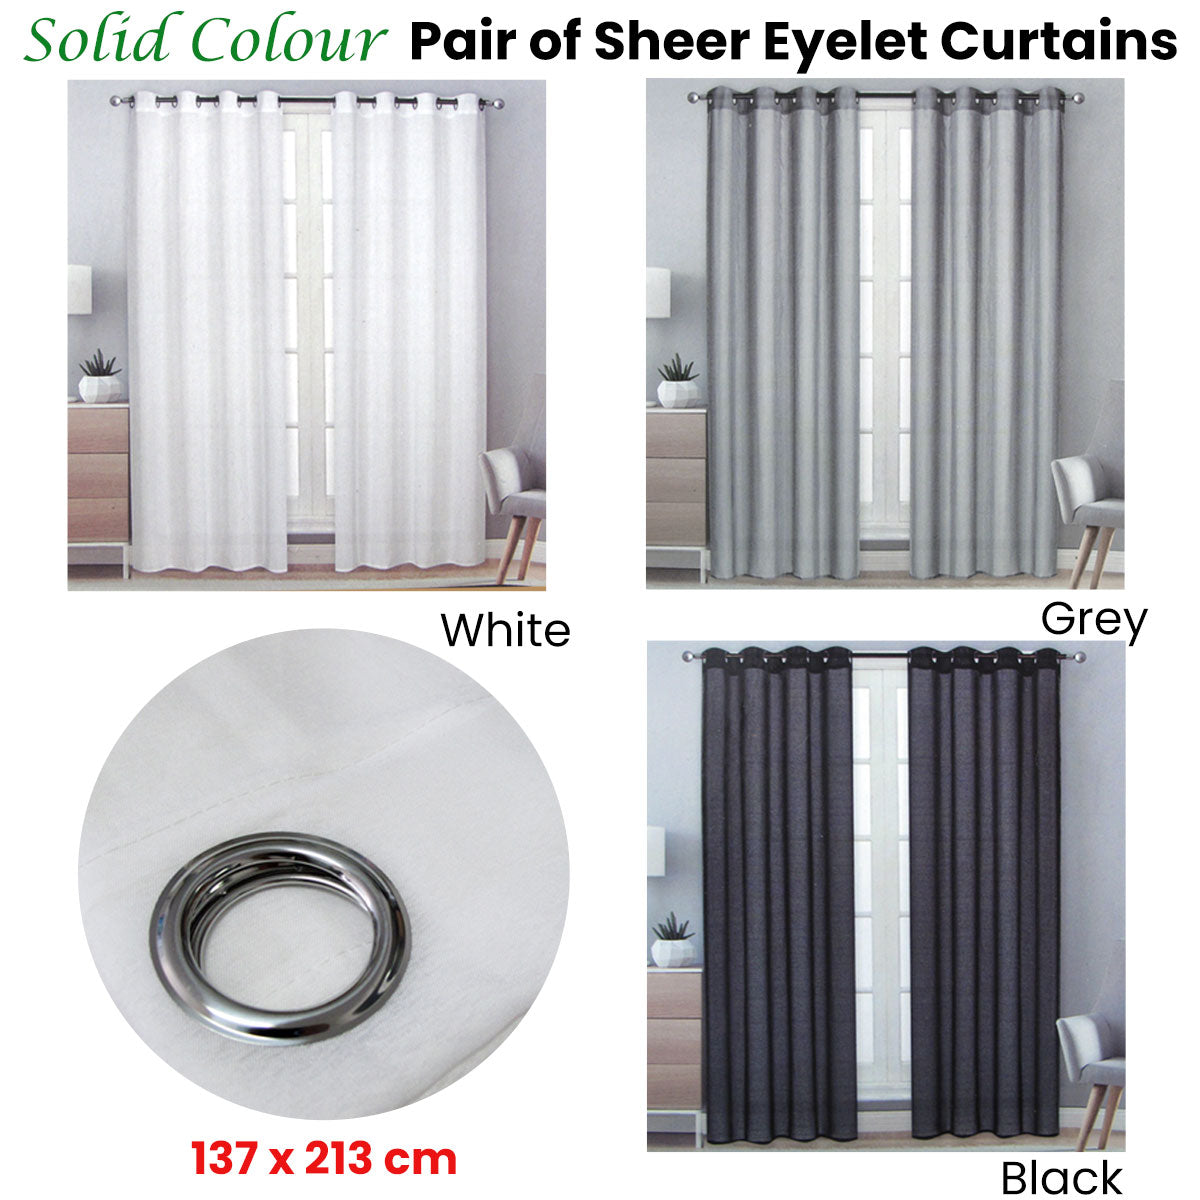 Pair of Solid Colour Sheer Eyelet Curtains 137 x 213 cm Grey